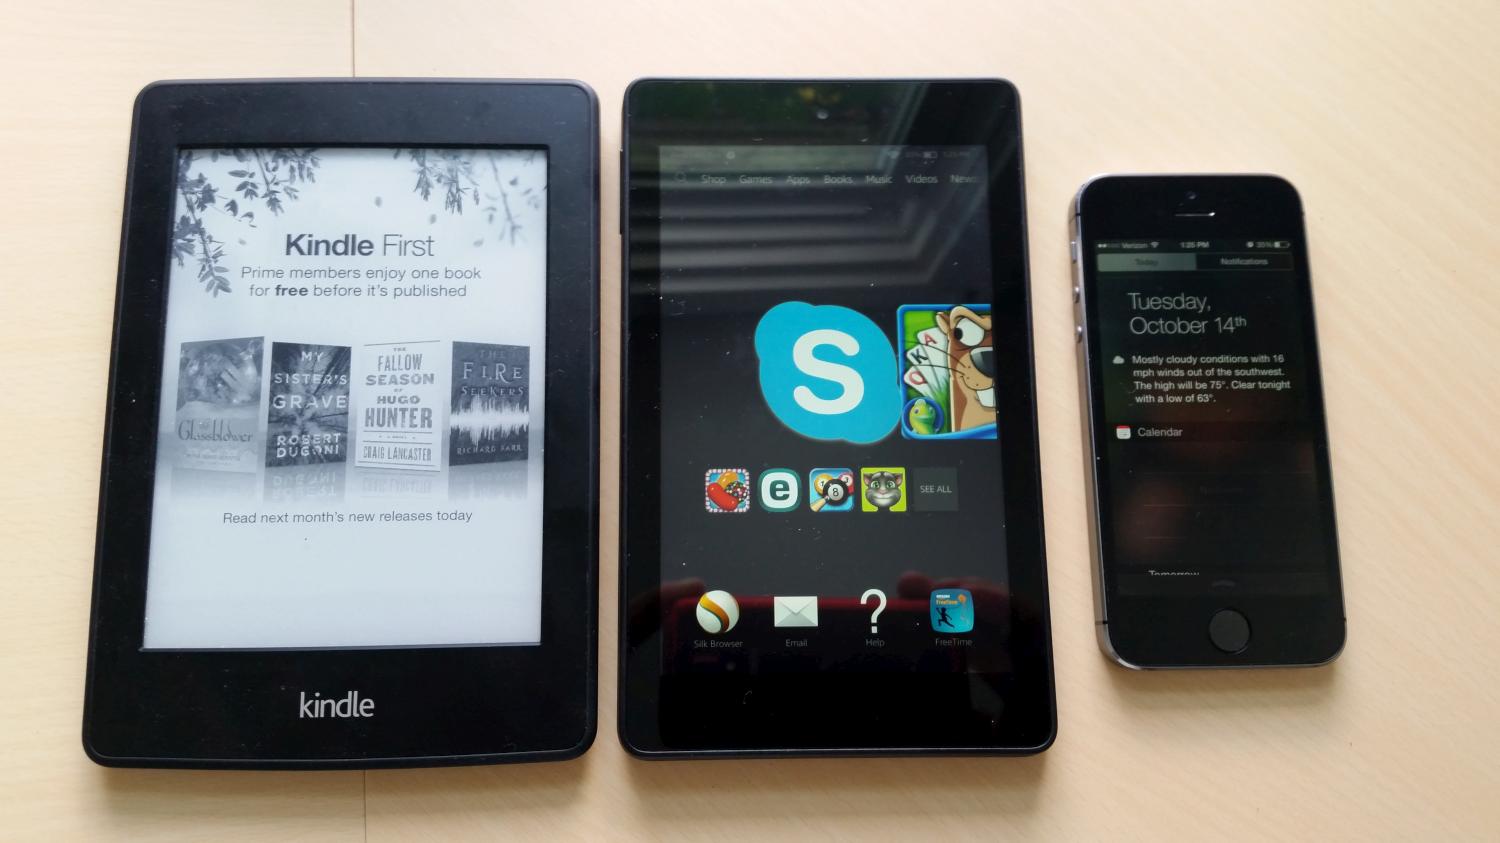 Kindle Paperwhite e-reader (left), Kindle Fire HD 6 tablet (middle), iPhone 5S (right) (Doug Aamoth / TIME)